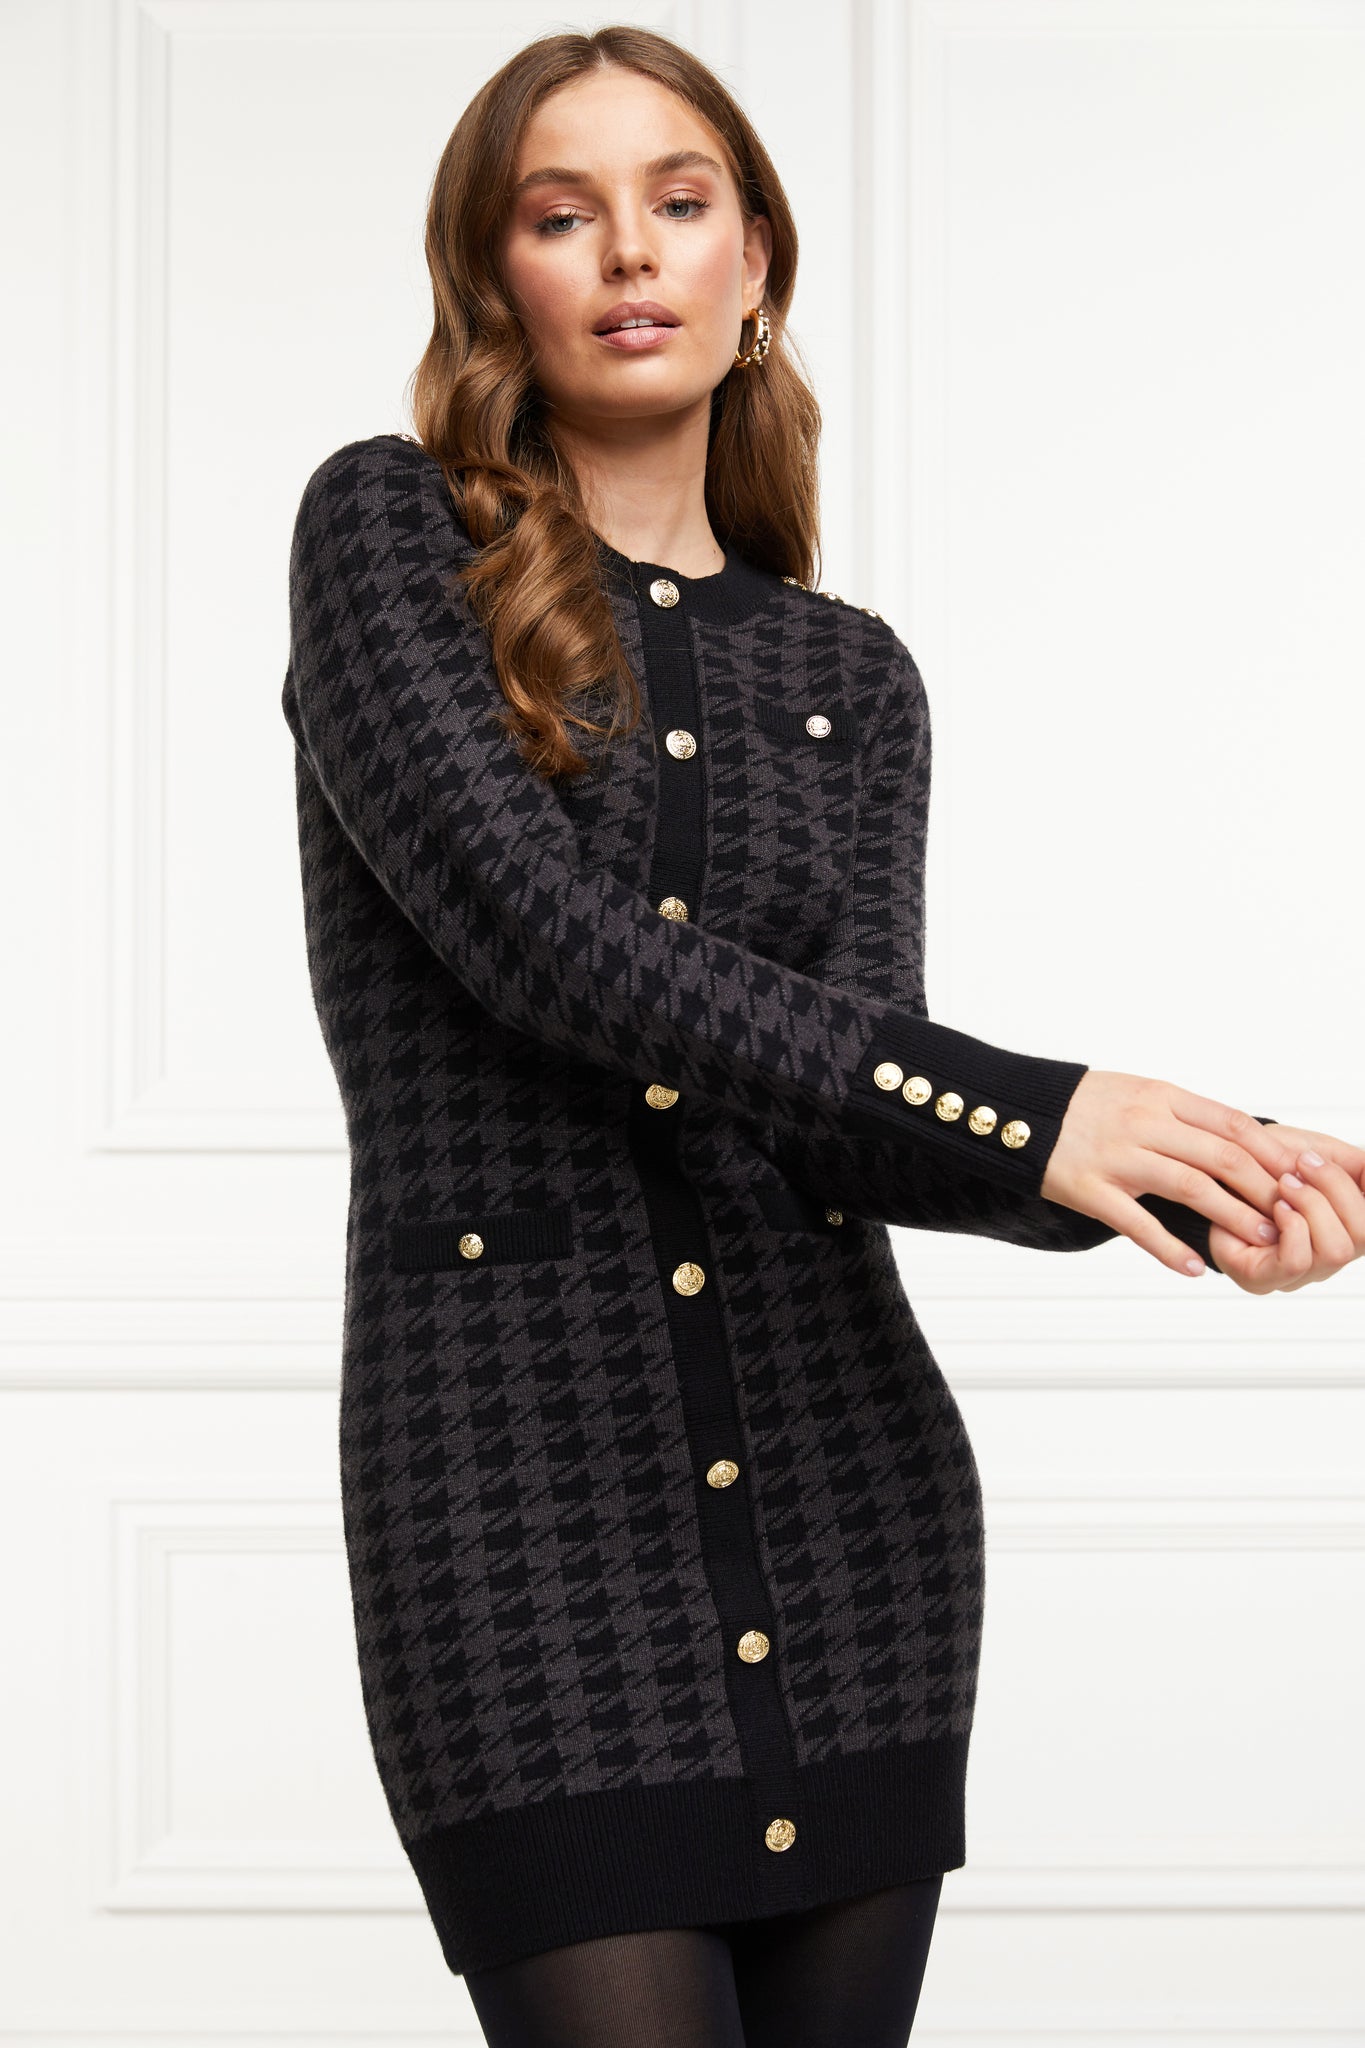 womens slim fit crew neck long sleeve knitted dress in grey and black houndstooth with gold button detail on contrast black panel down the centre front and two black contrast welt pockets on chest and two on the hips with gold buttons on the centre of each and contrasting black ribbed hem neckline and cuffs